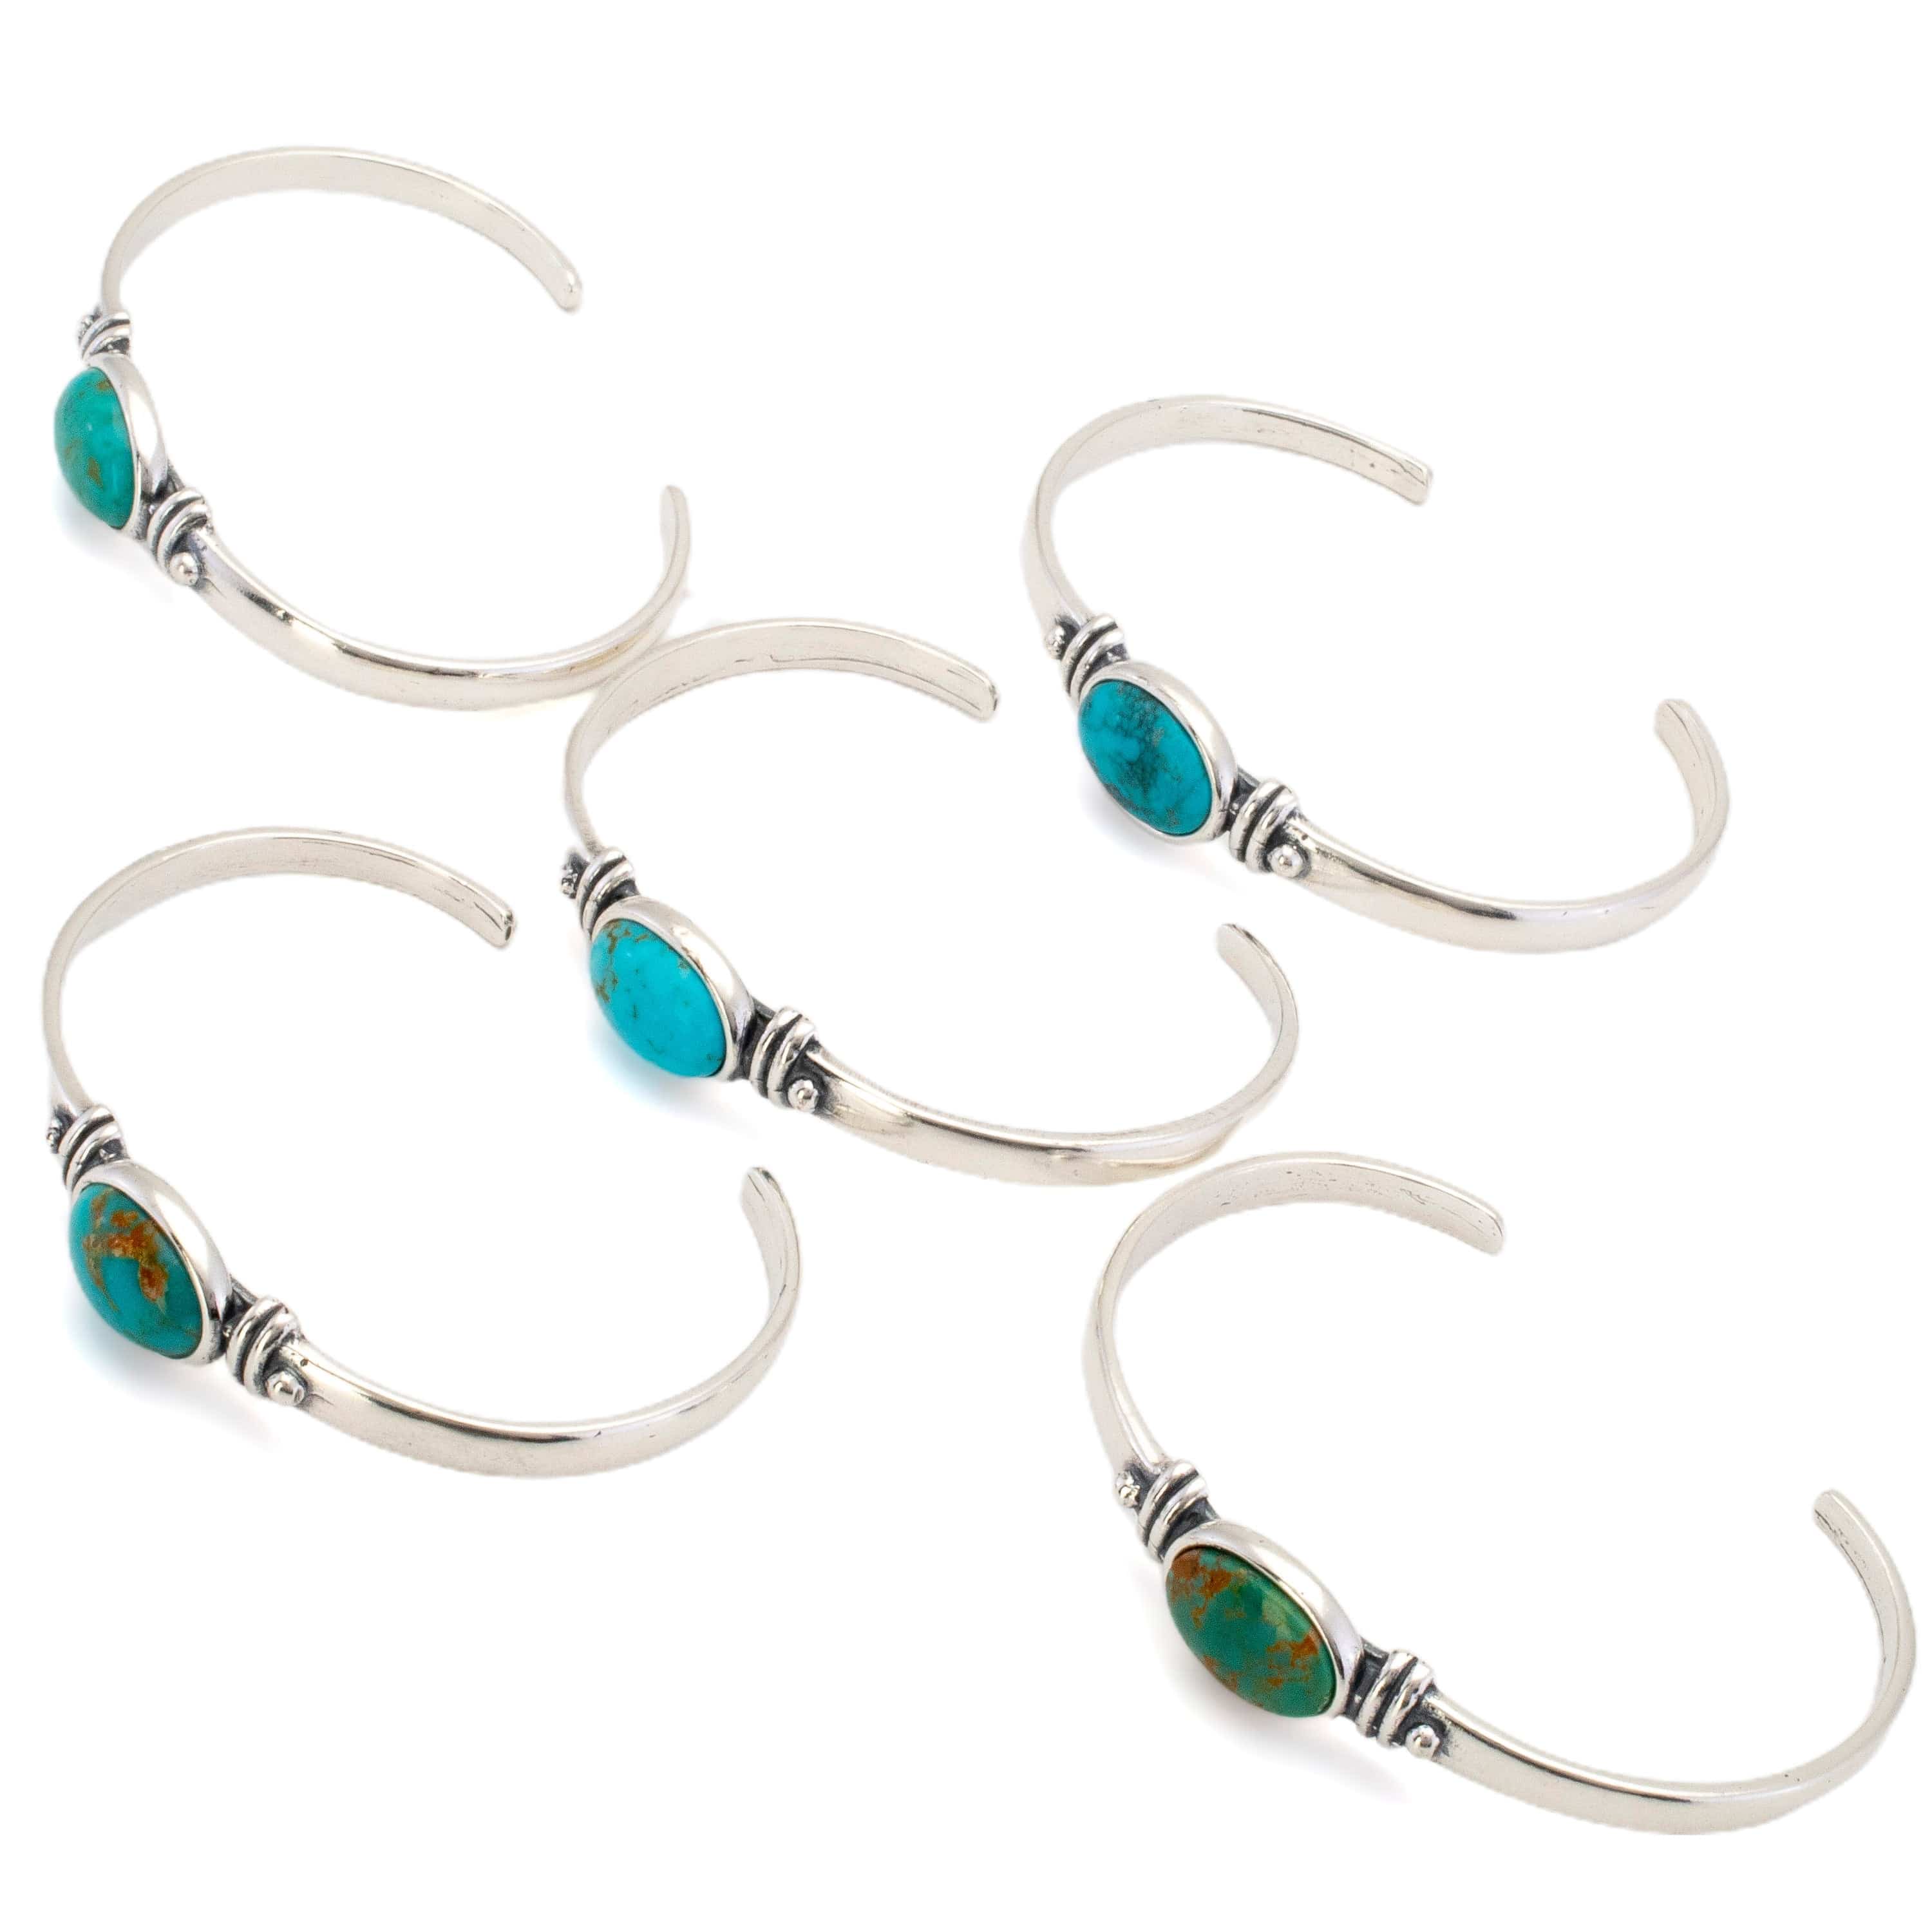 Kalifano Southwest Silver Jewelry Oval Kingman Turquoise USA Handmade 925 Sterling Silver Cuff NMB350.002